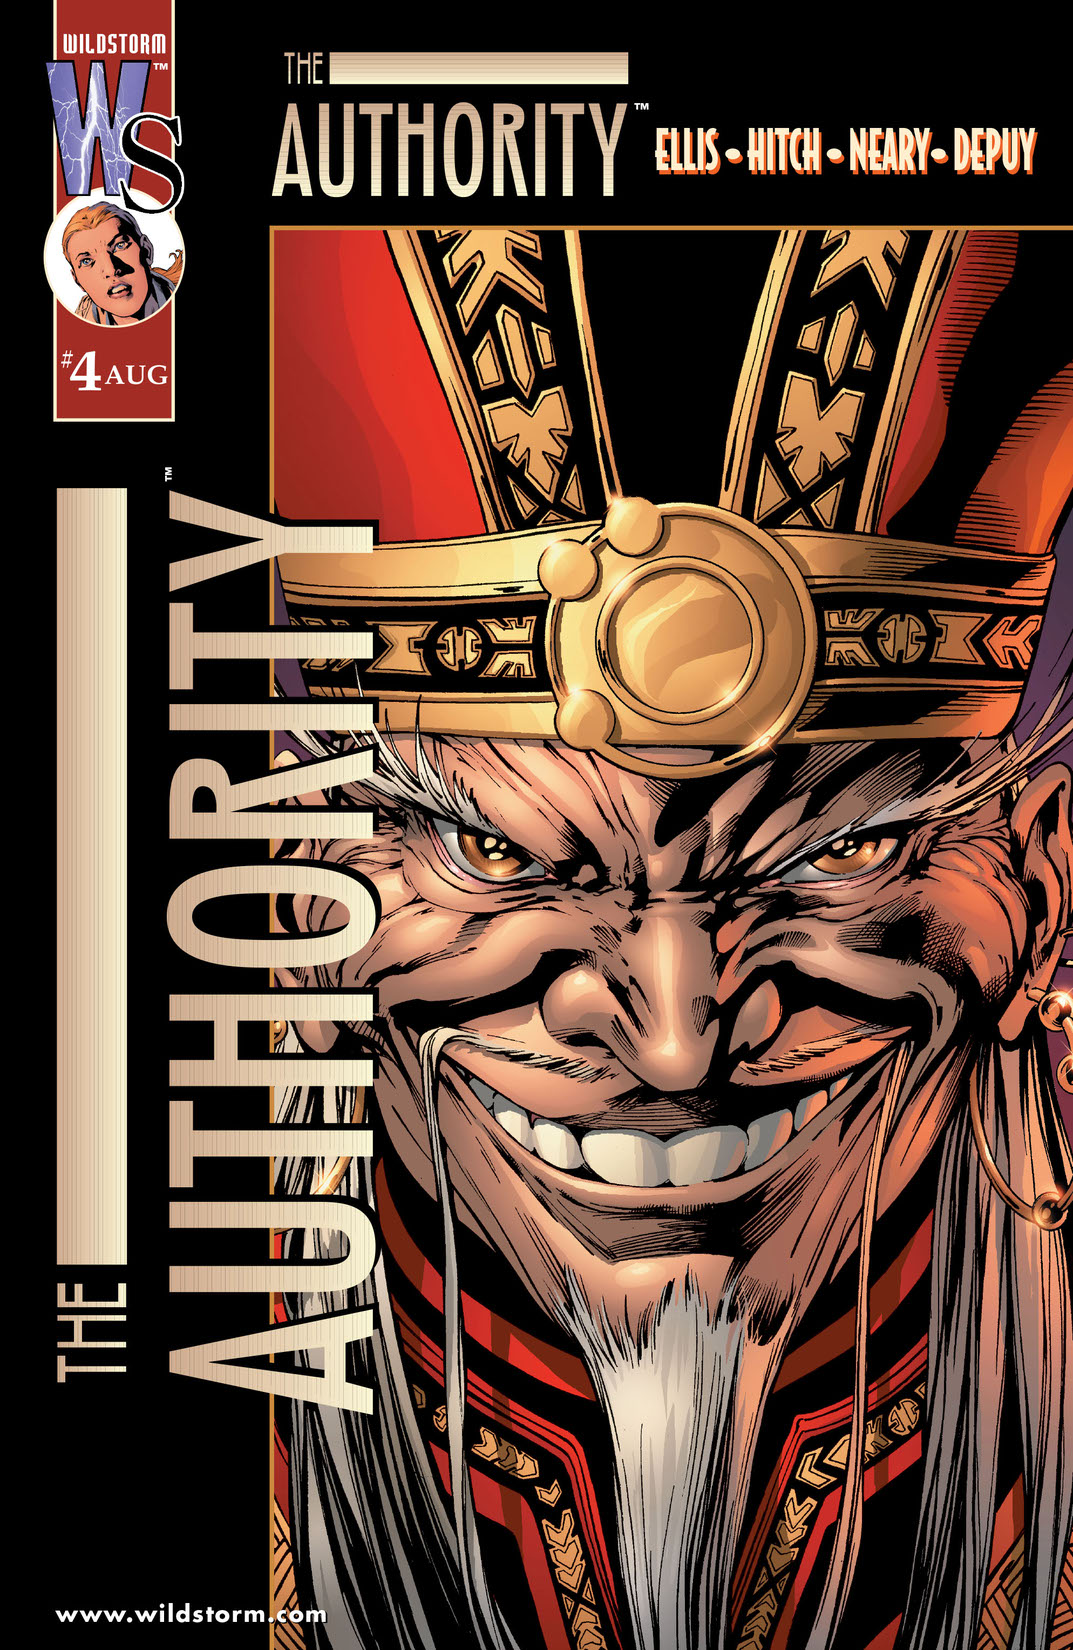 The Authority (1999-) #4 preview images